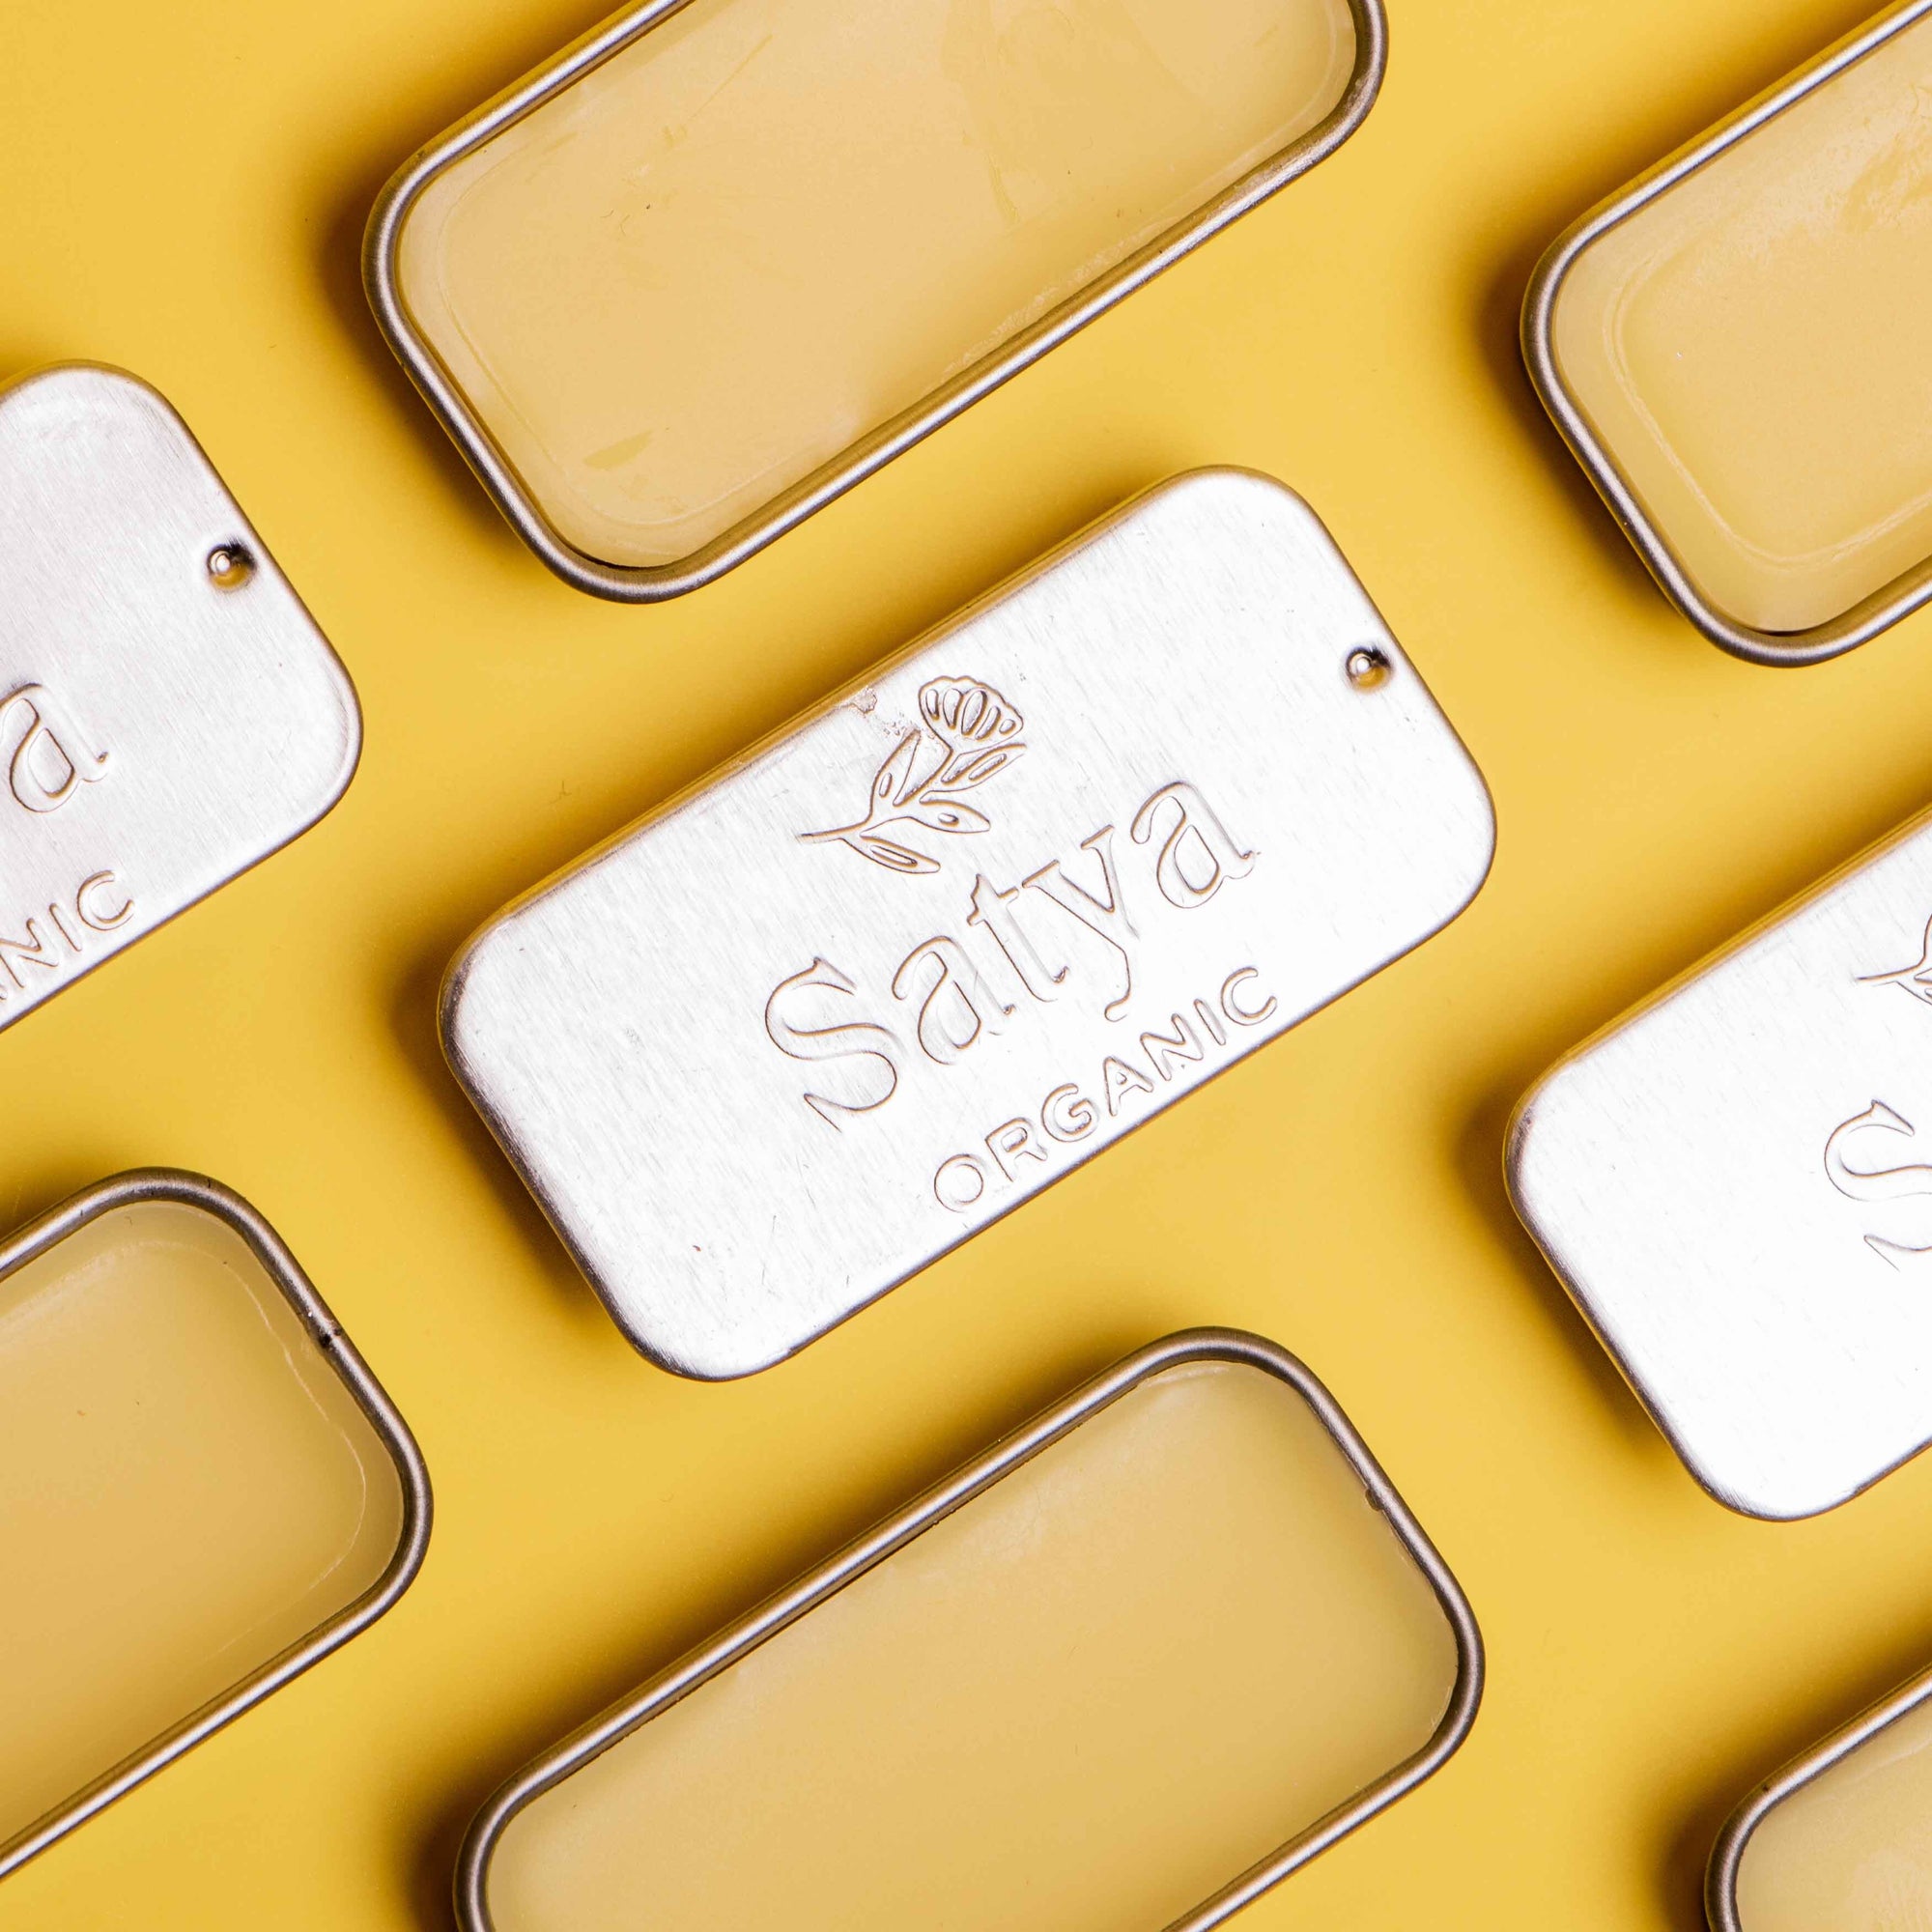 Satya organic eczema relief comes in easy to use tins.